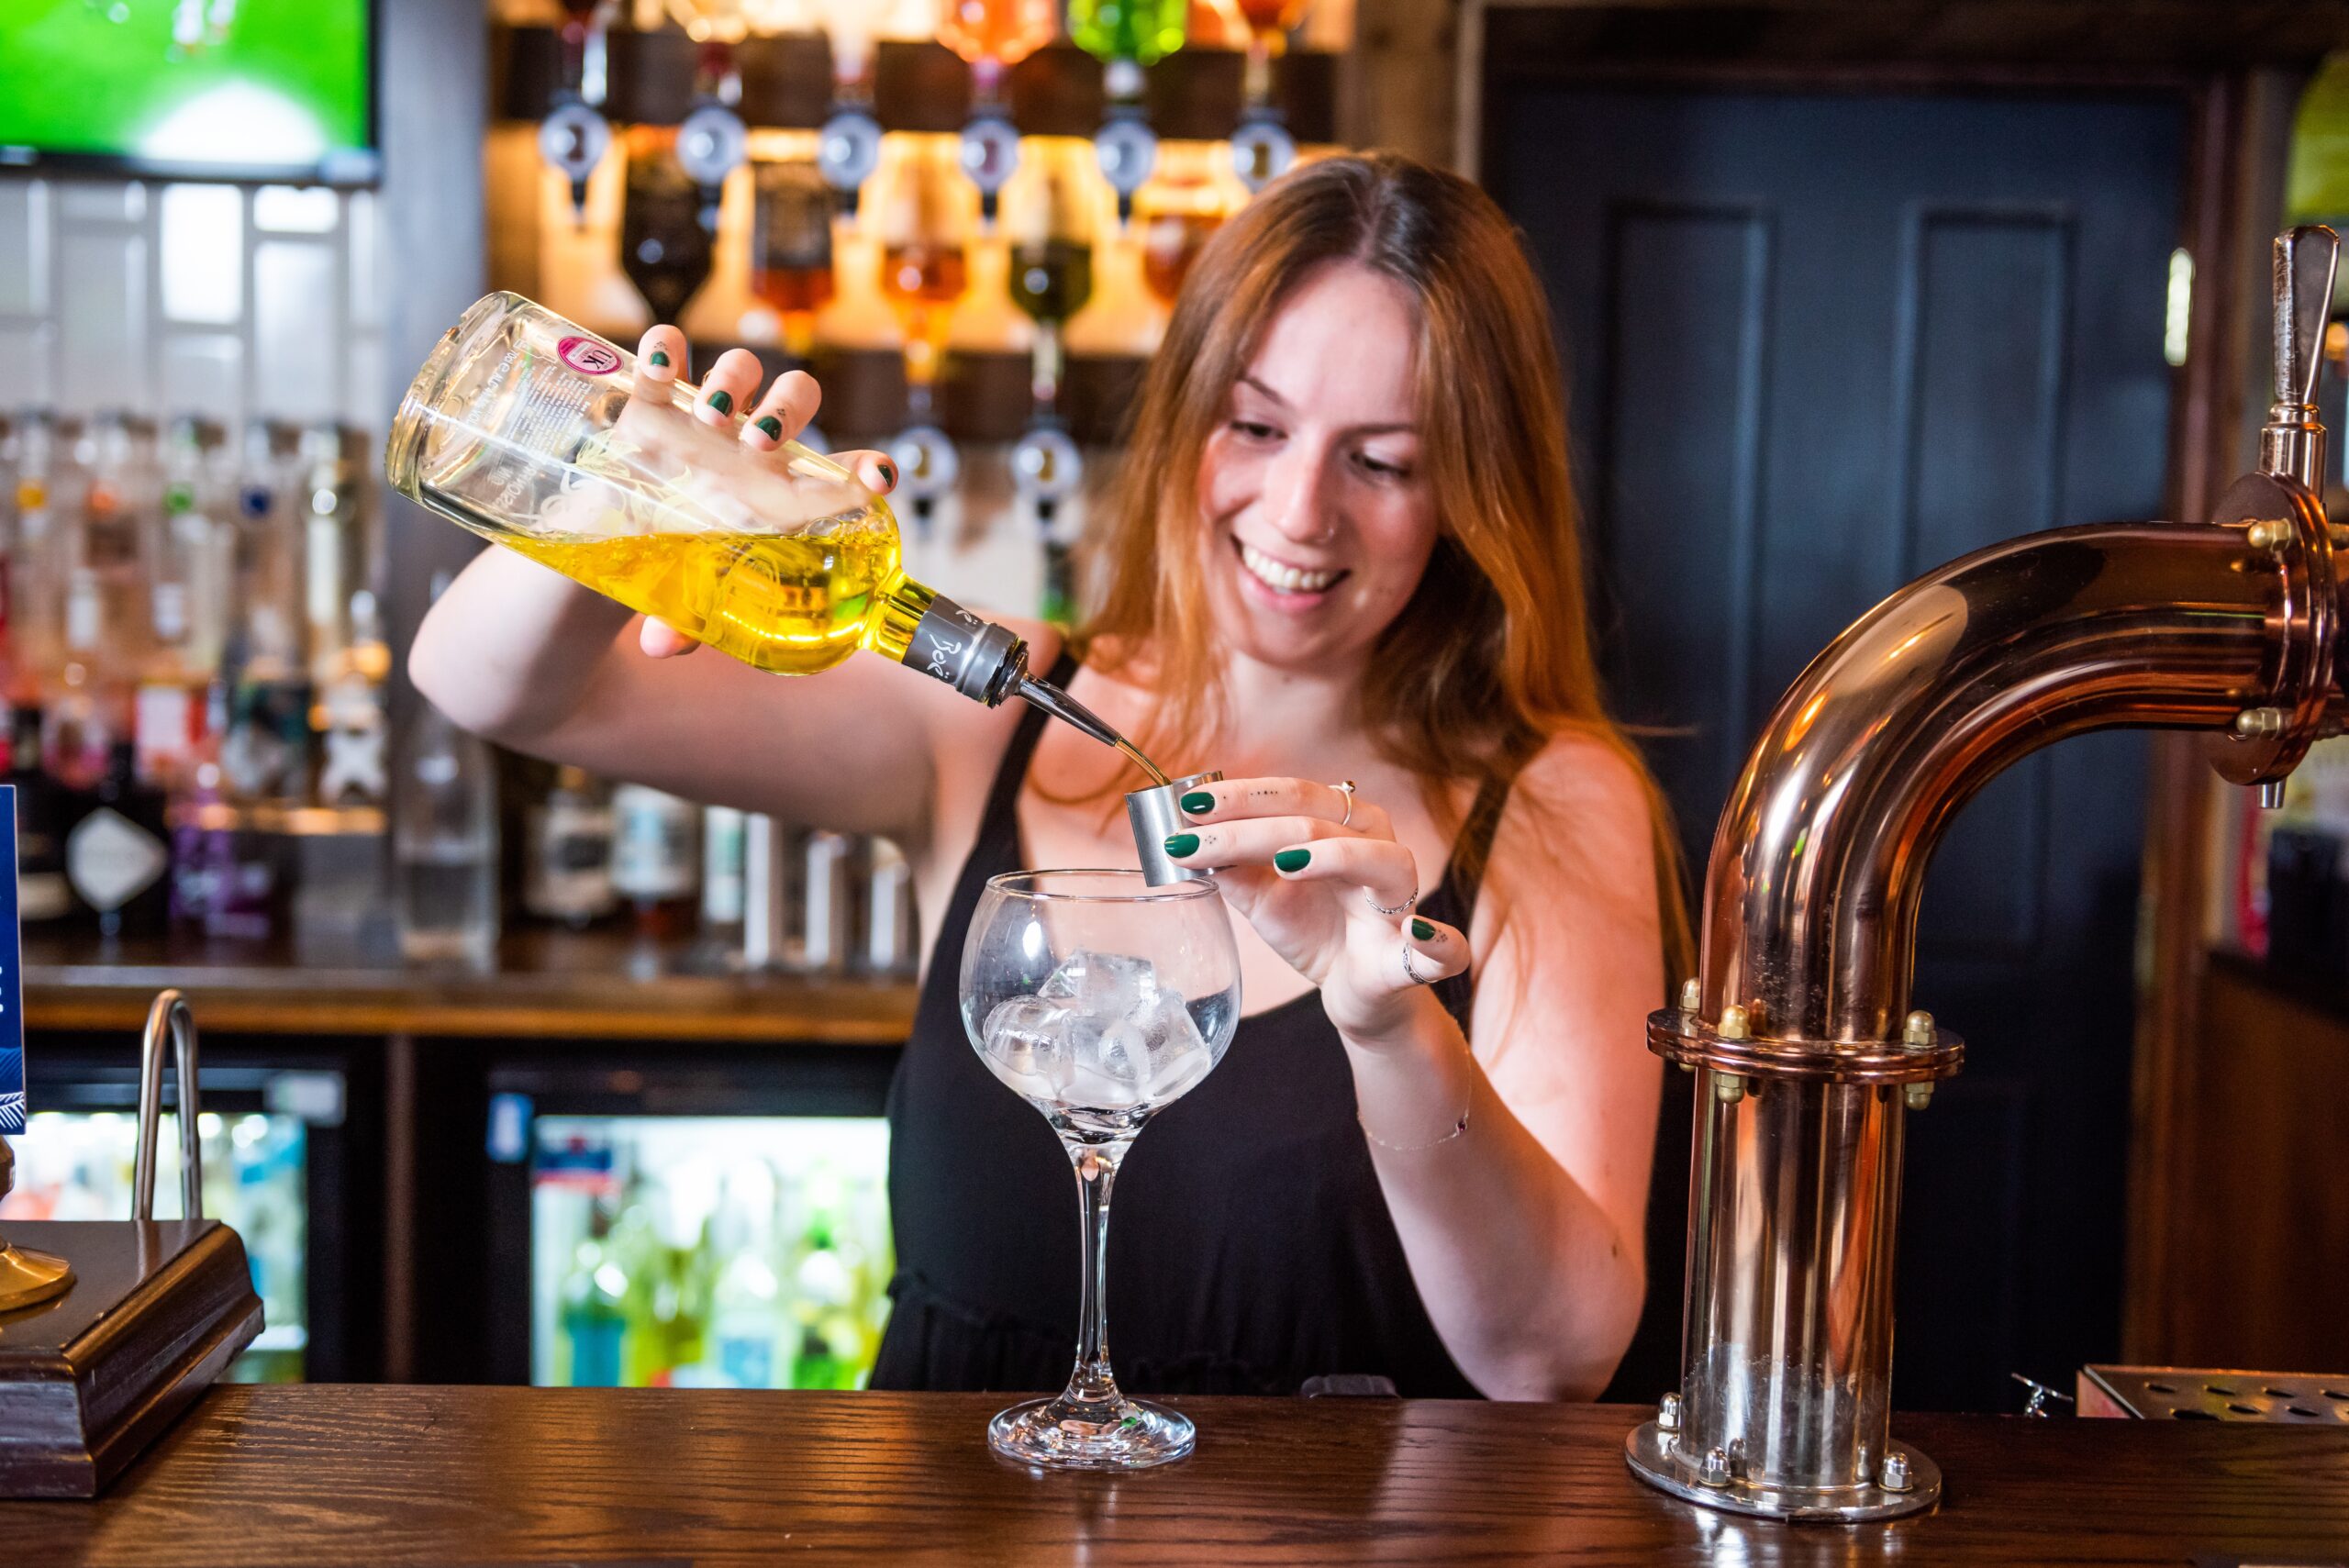 A woman pouring a drink at a bar.